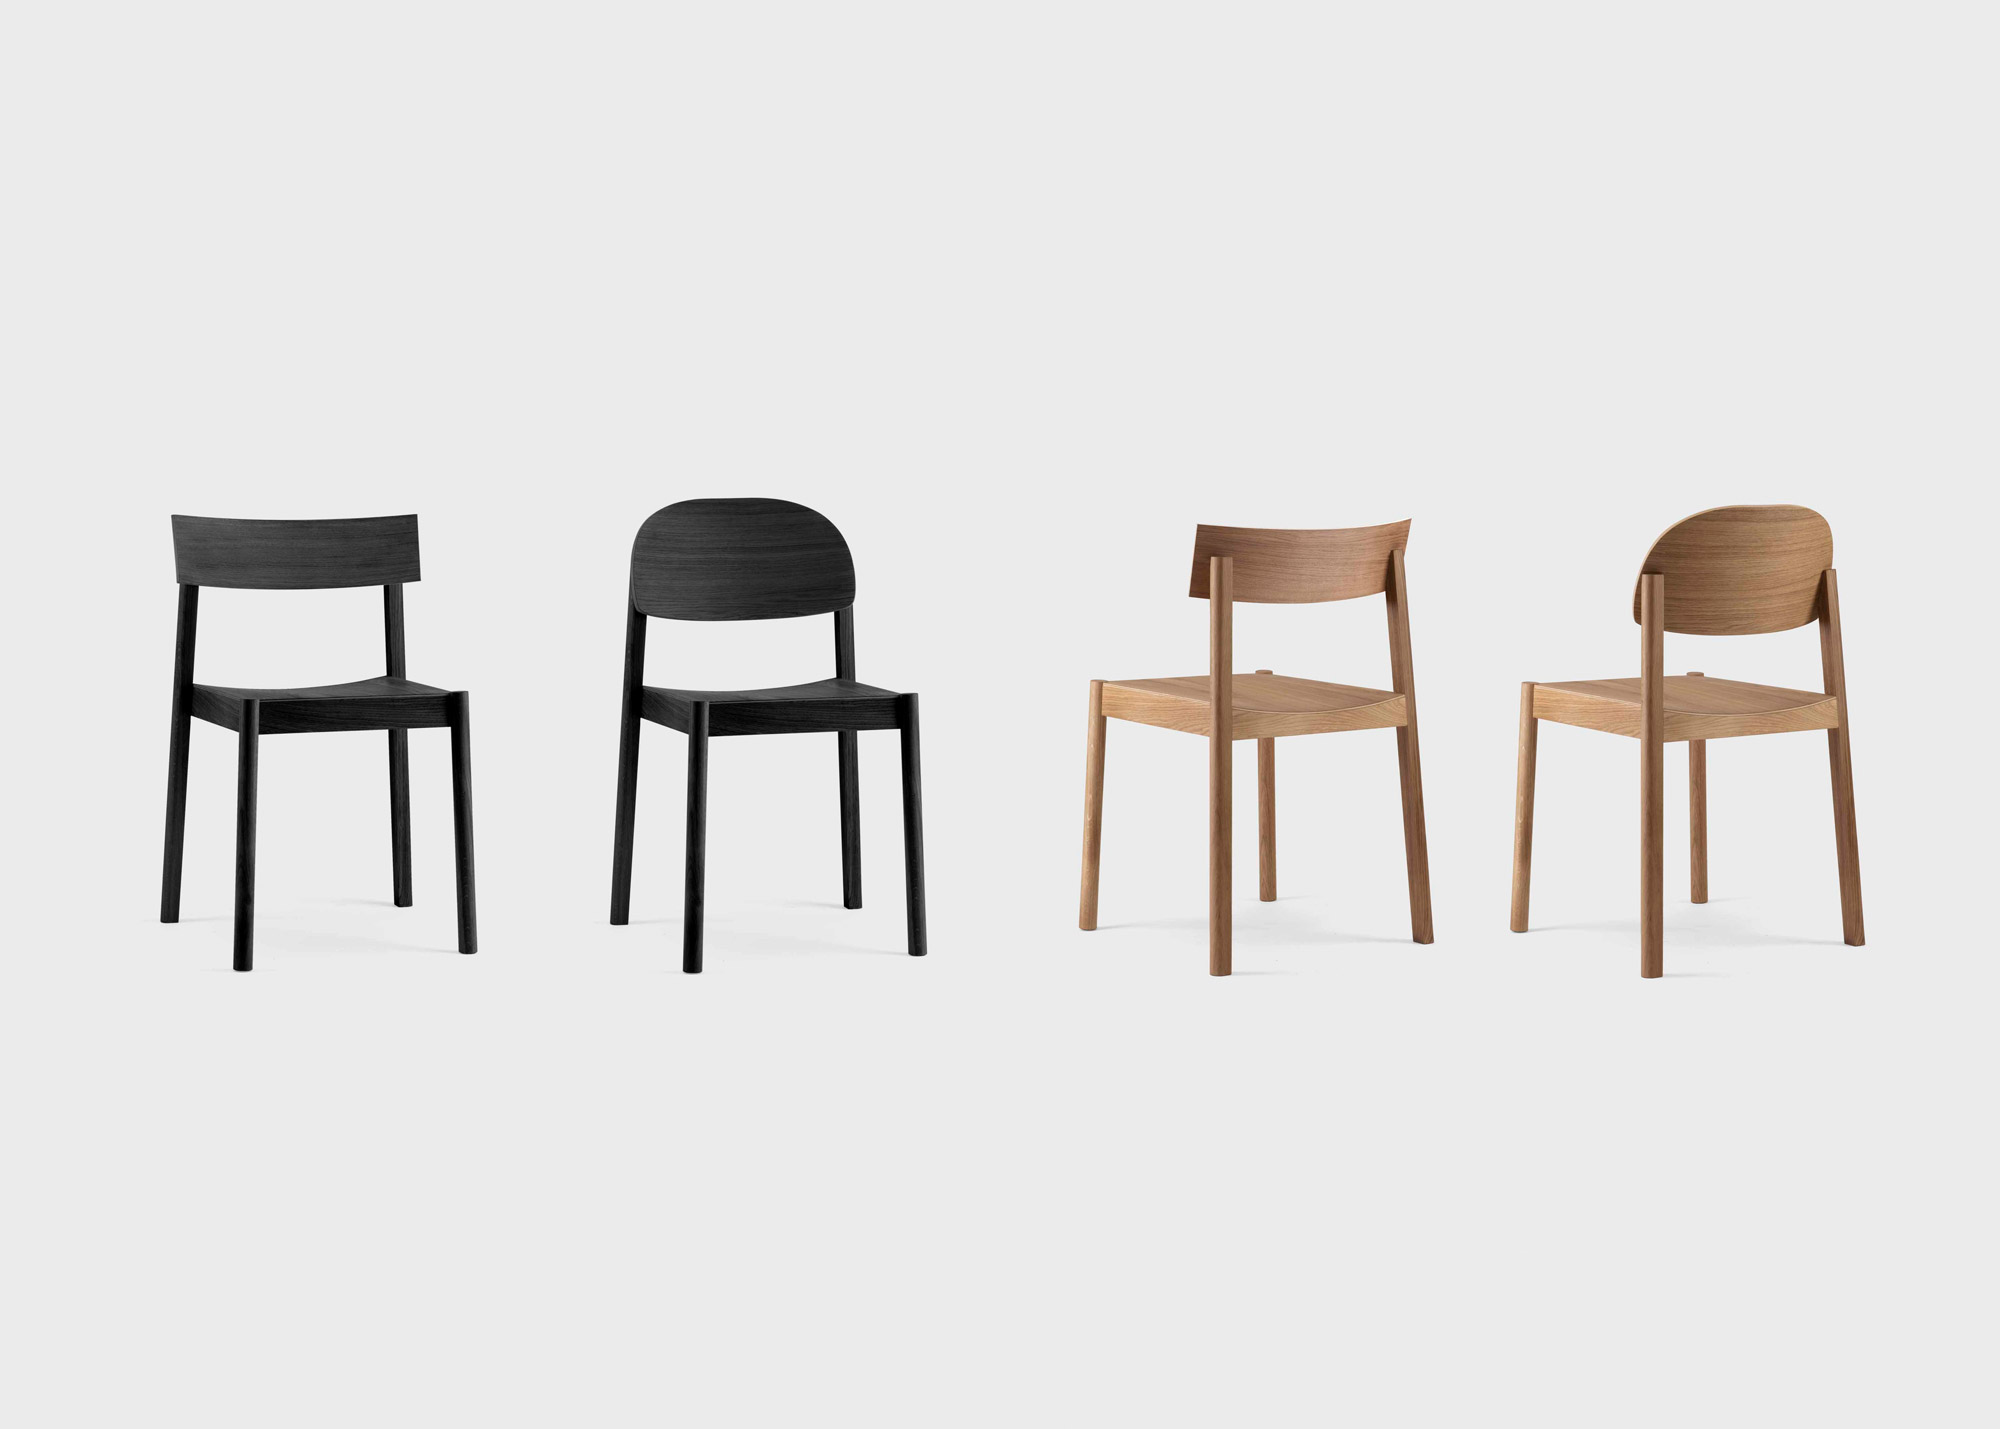 Photography of all variants of Side View of a Minimalist Chair called Citizen Chair